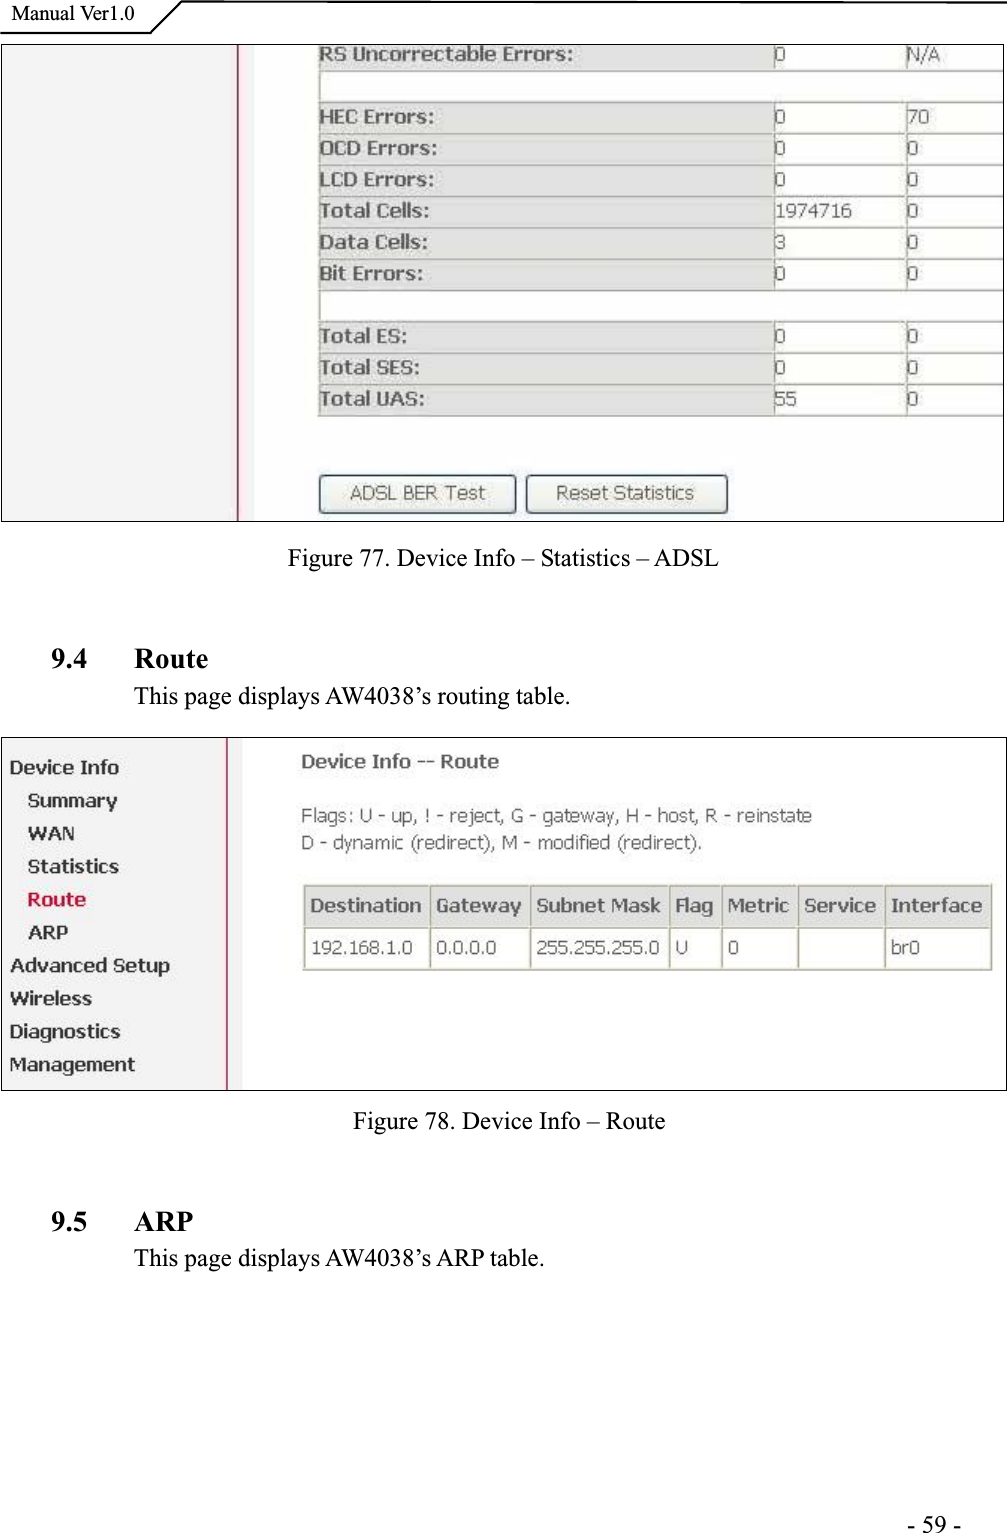  Manual Ver1.0Figure 77. Device Info – Statistics – ADSL9.4 Route This page displays AW4038’s routing table. Figure 78. Device Info – Route 9.5 ARP This page displays AW4038’s ARP table.                                                                      -59-